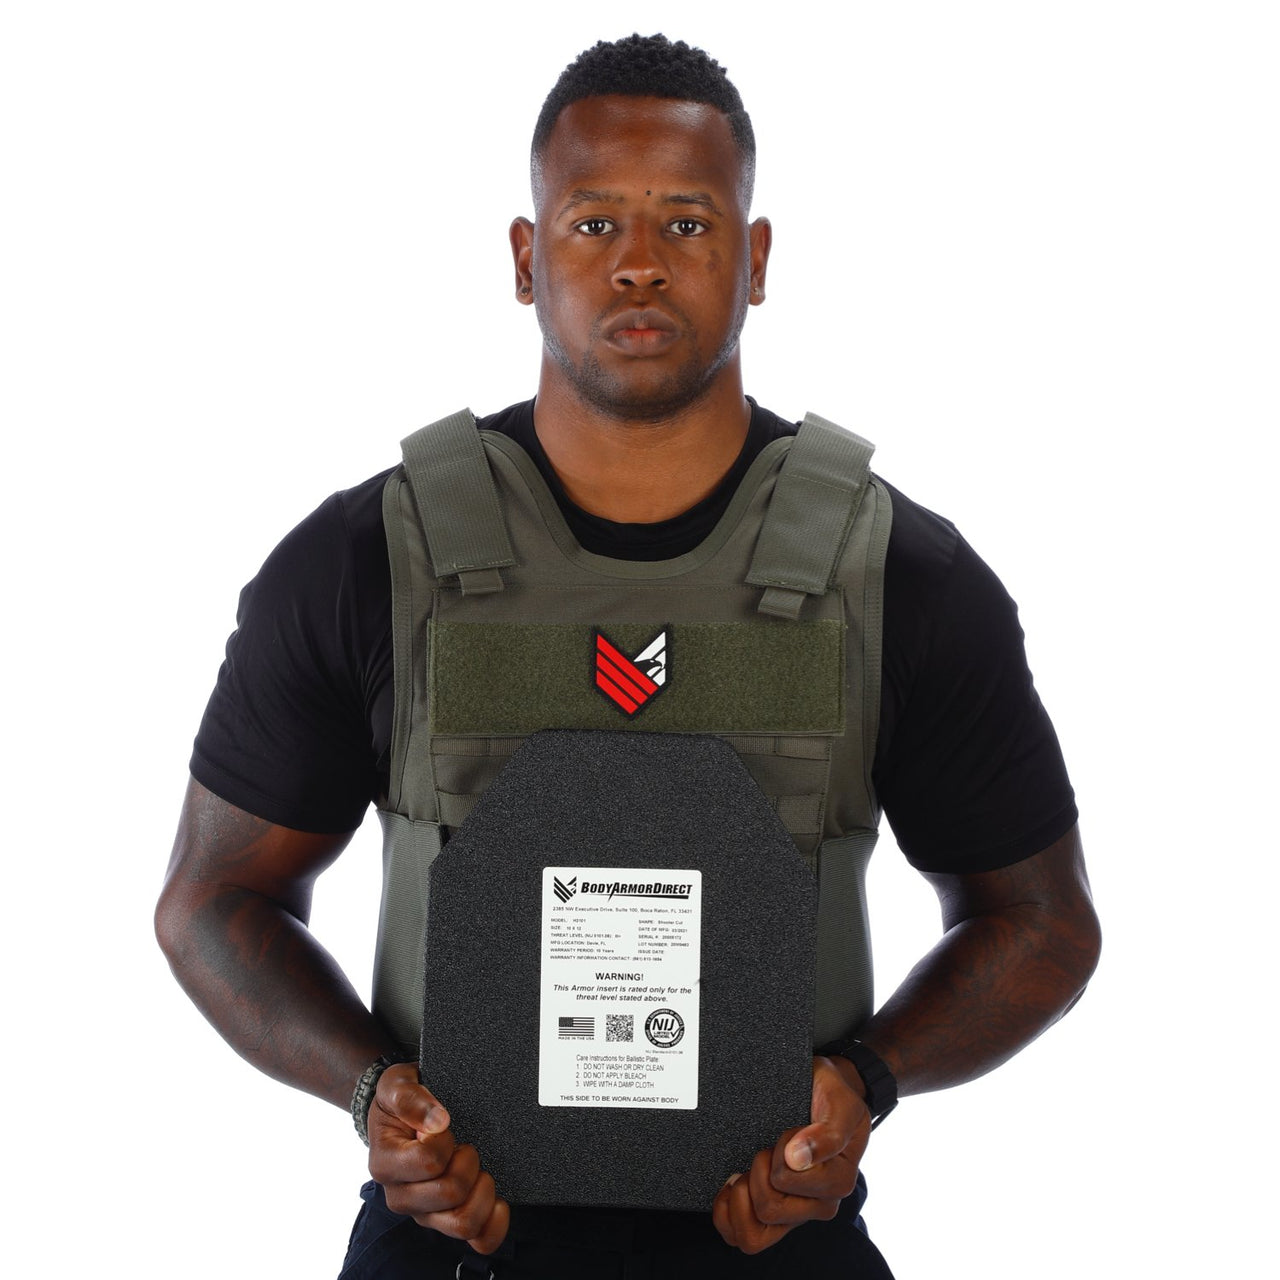 A man holding a Body Armor Direct All Star Tactical Enhanced Multi-Threat Vest in front of a white background.